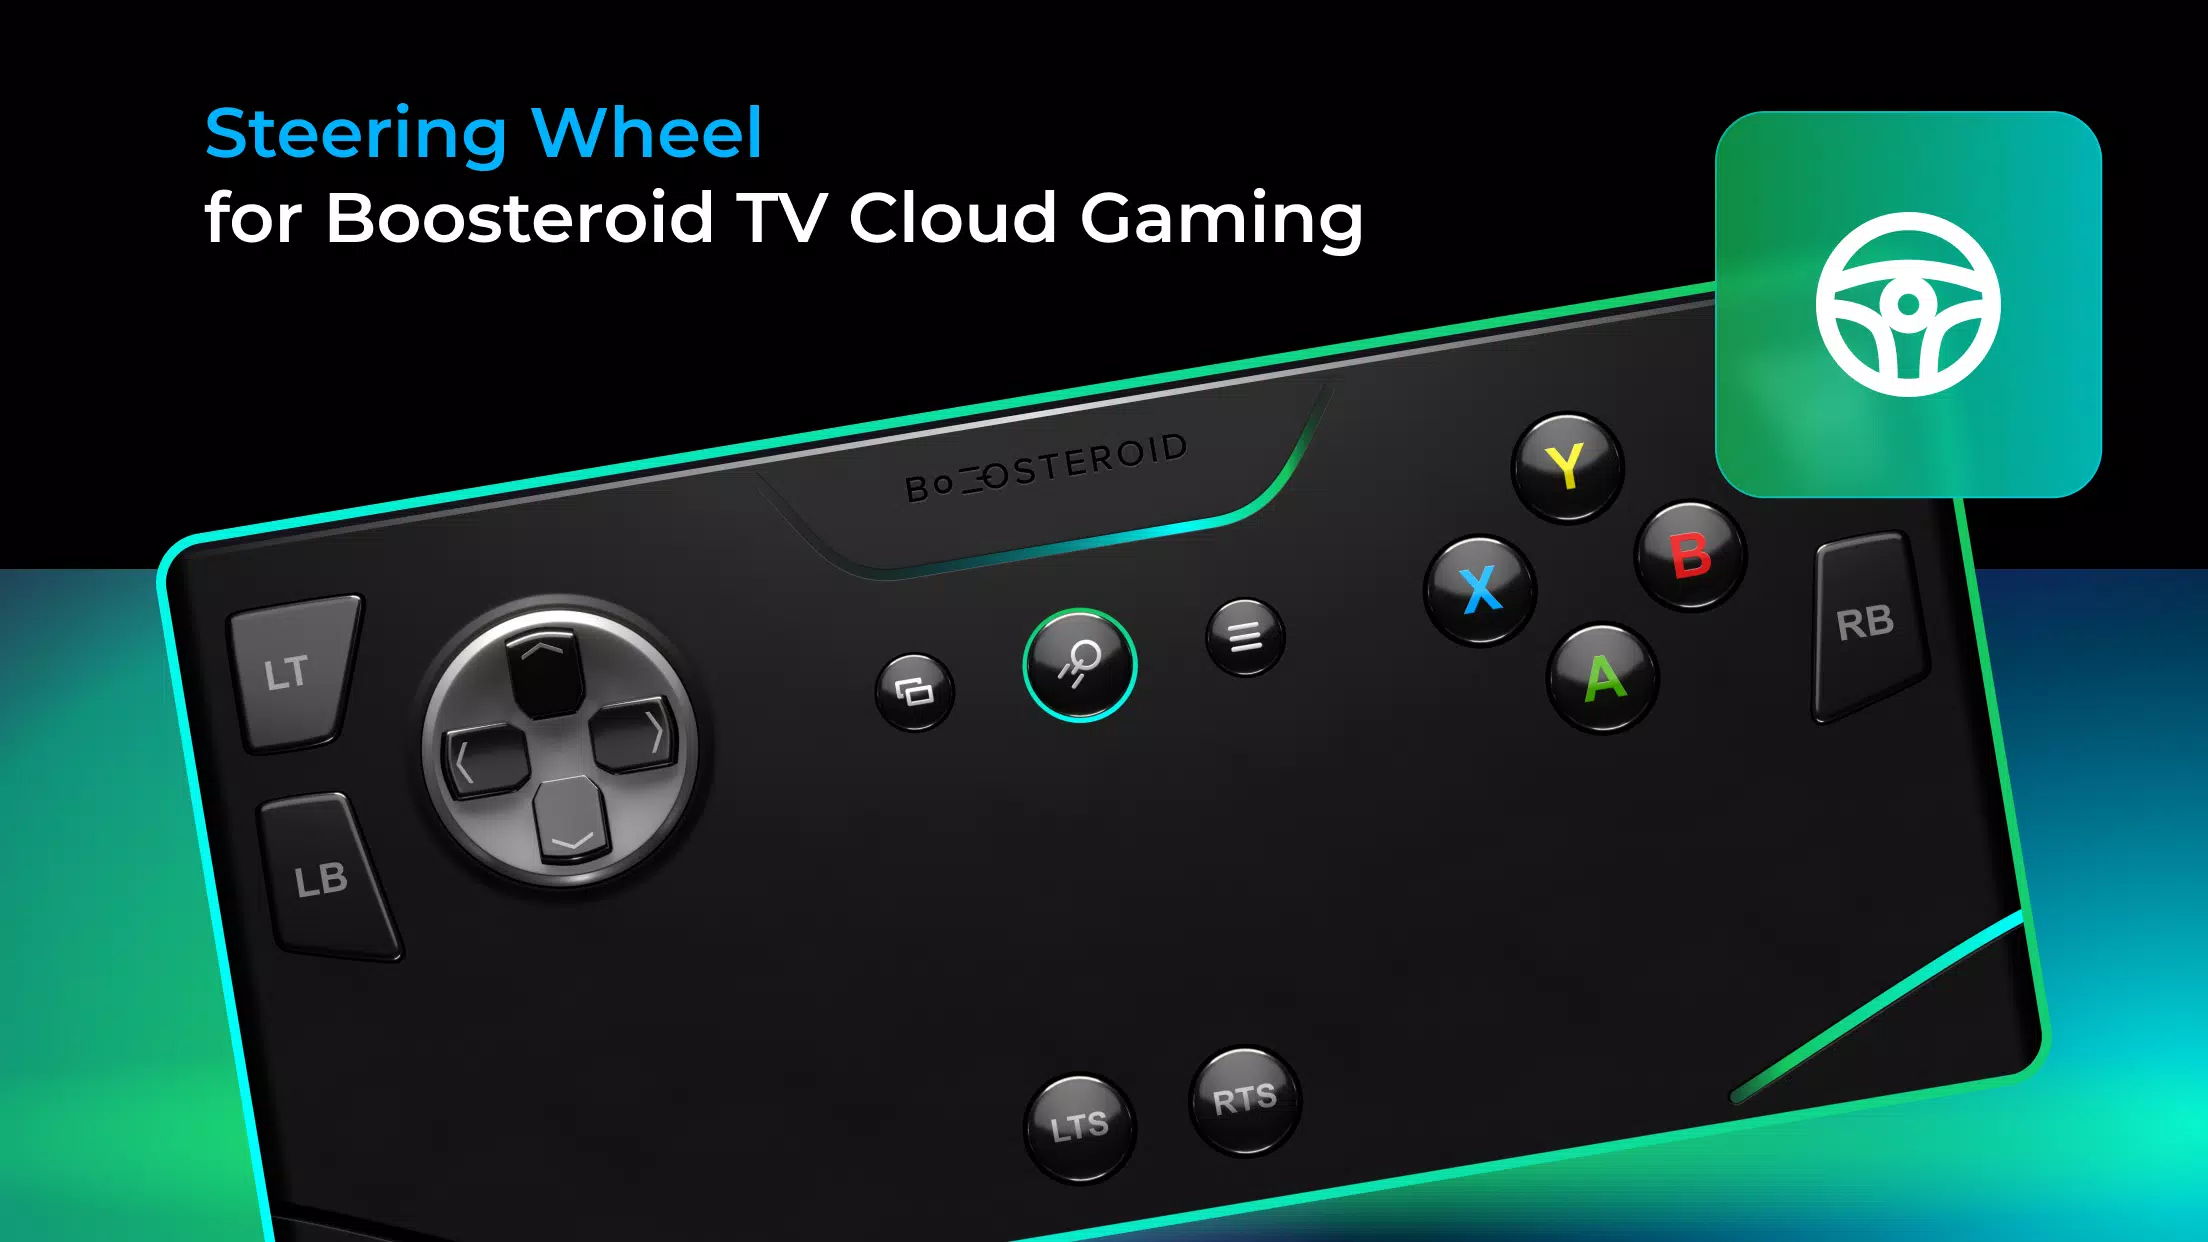 Download do APK de Boosteroid Cloud Gaming TV para Android